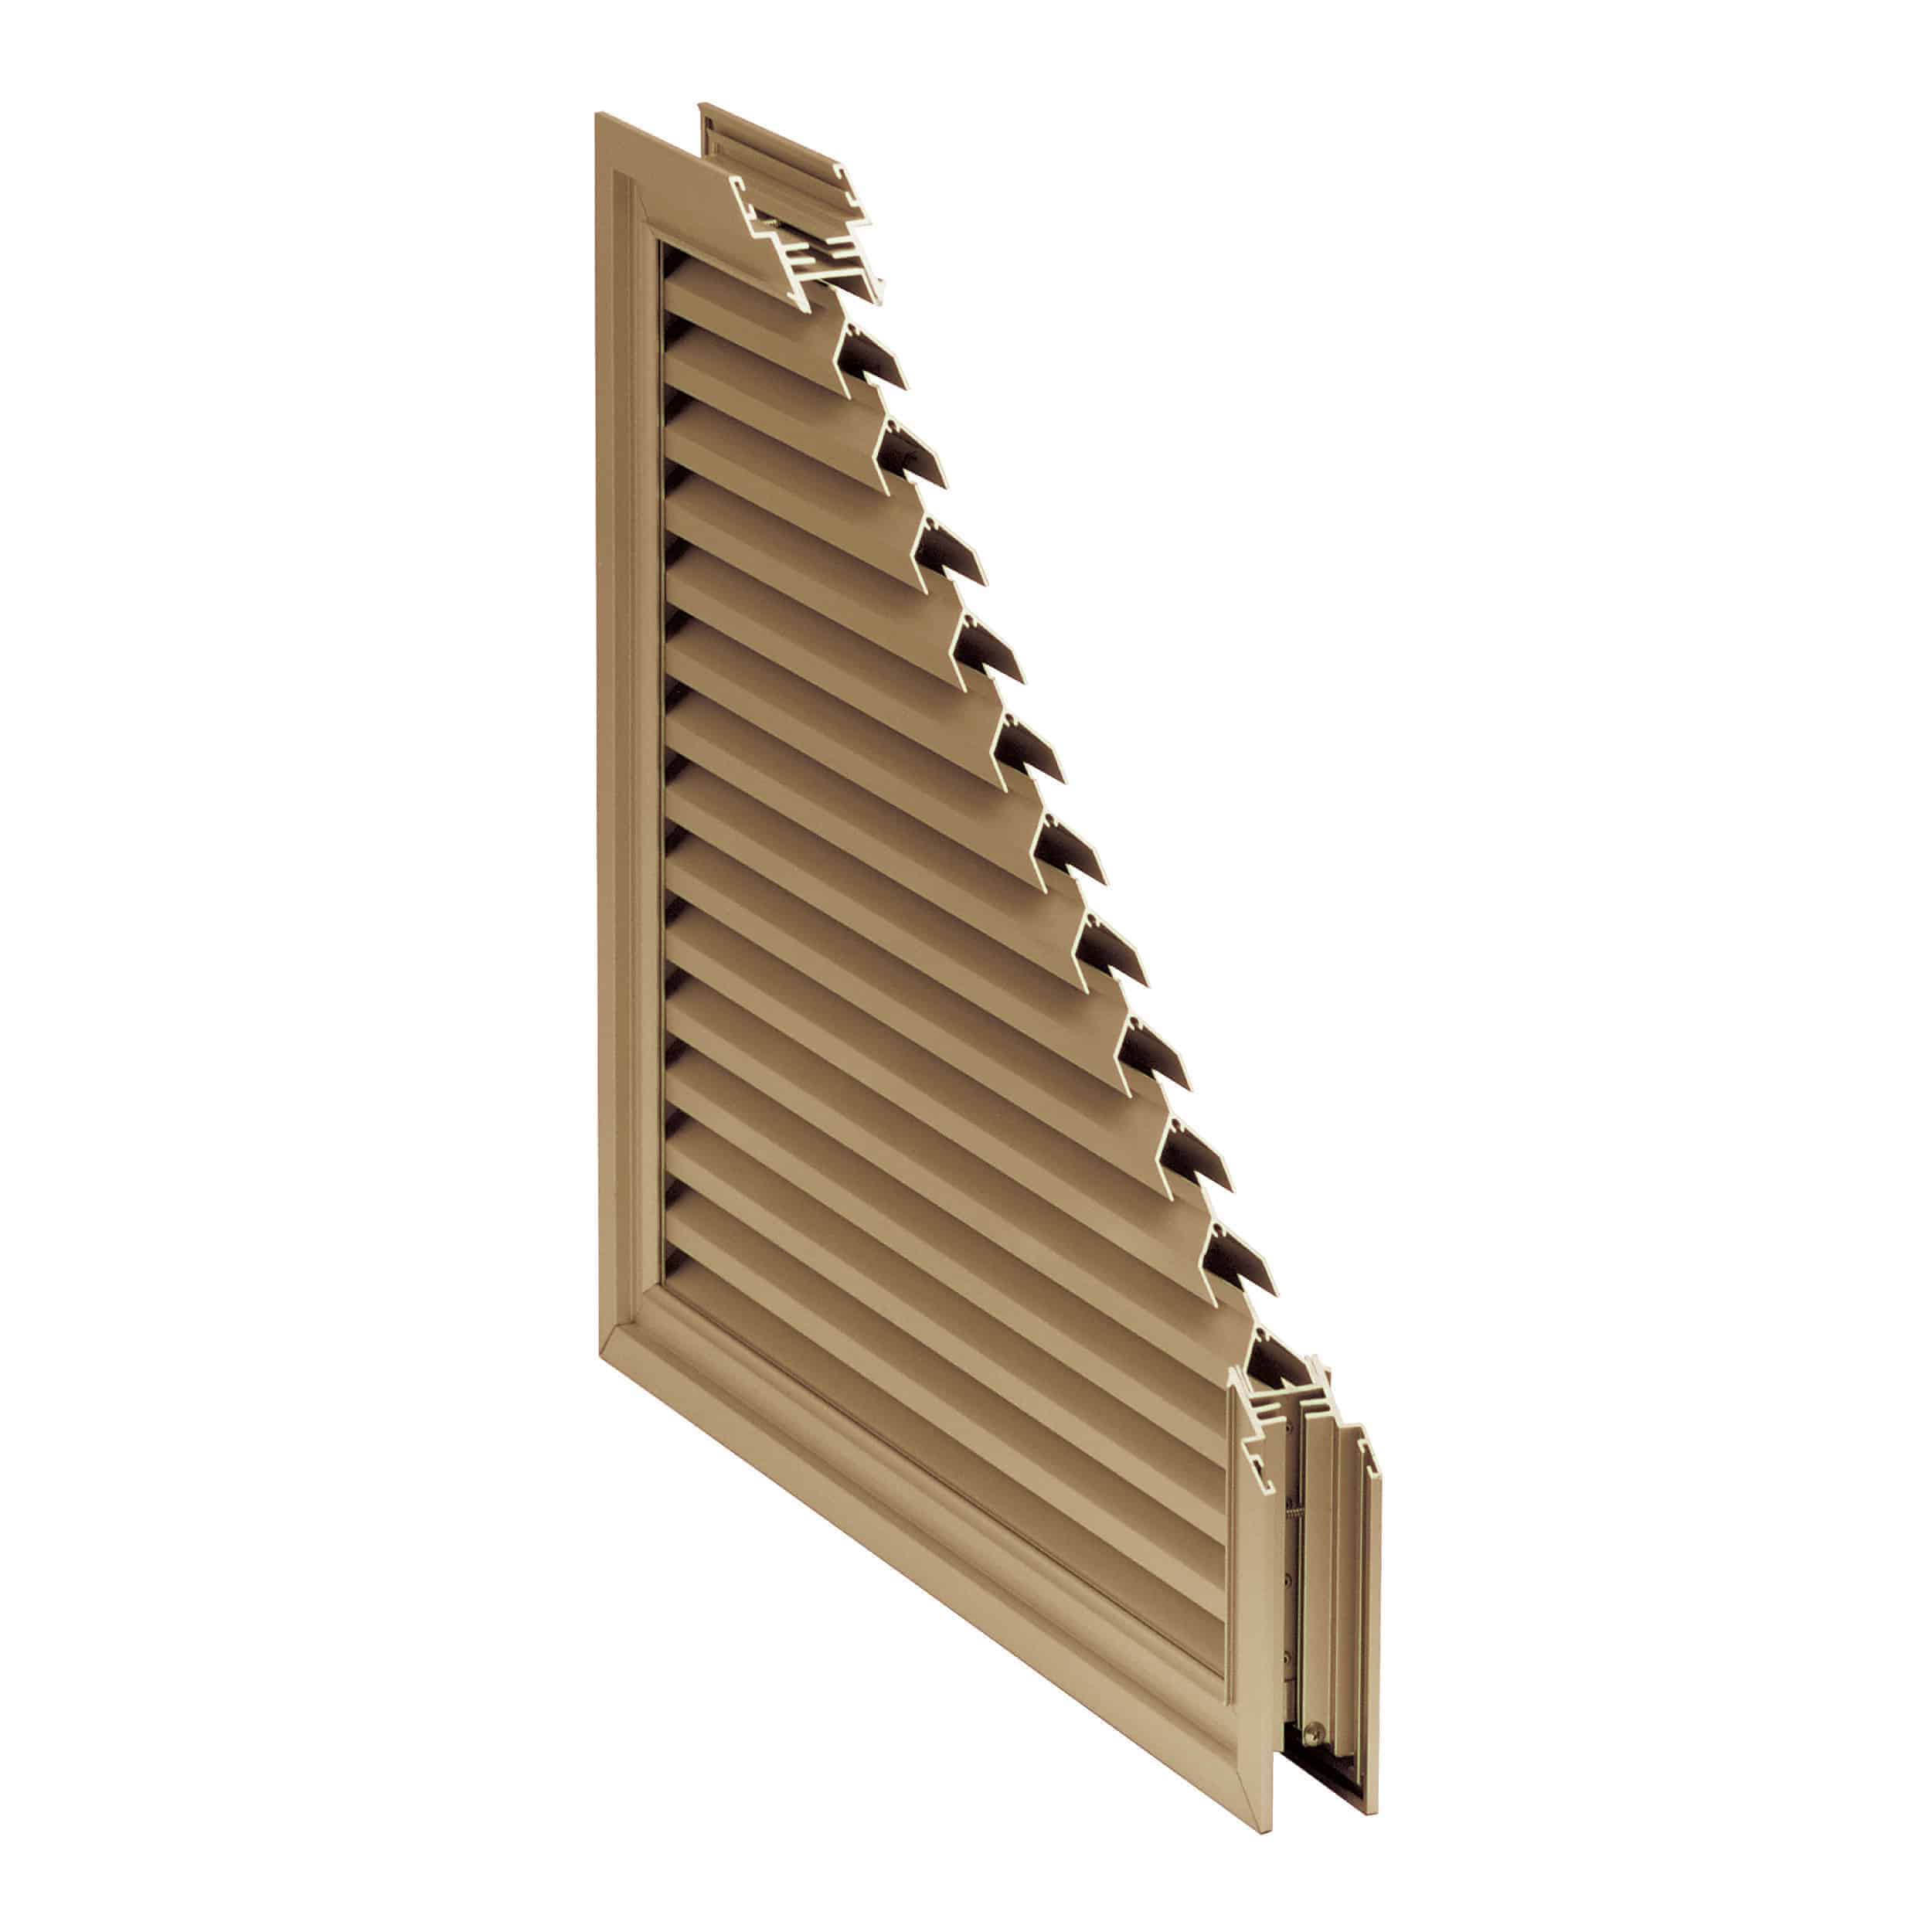 An image of a tan slatted louver on a white background.